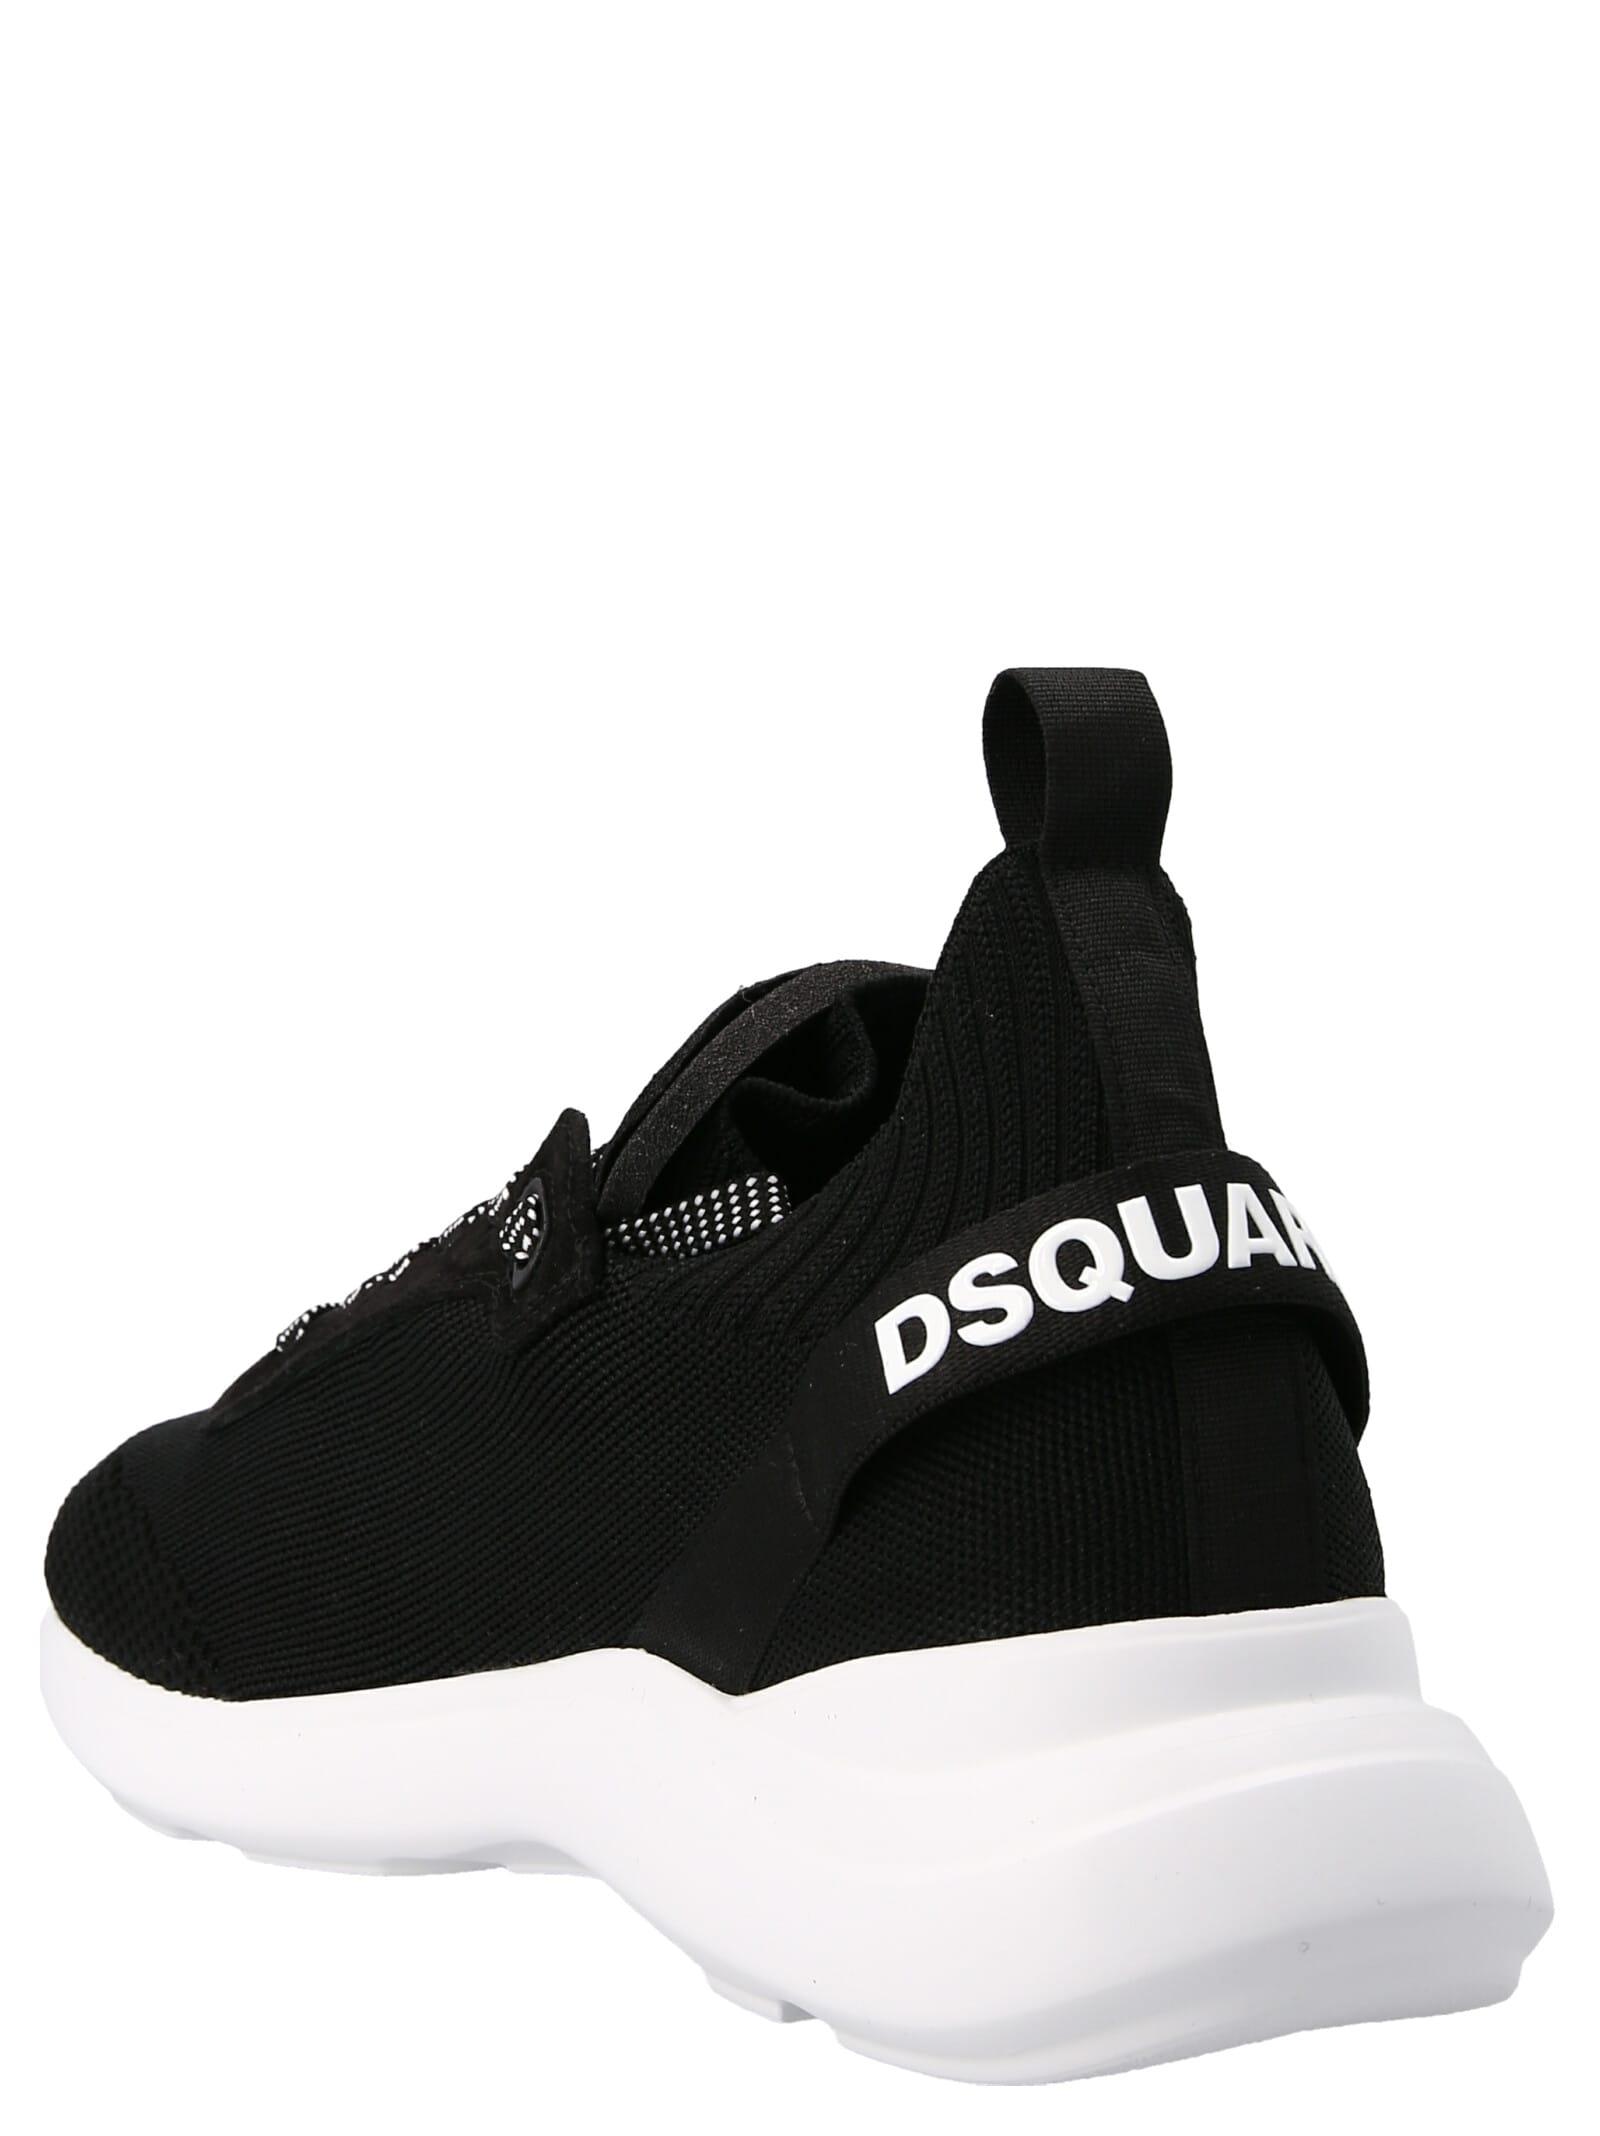 DSquared² 'fly' Sneakers in Black for Men | Lyst